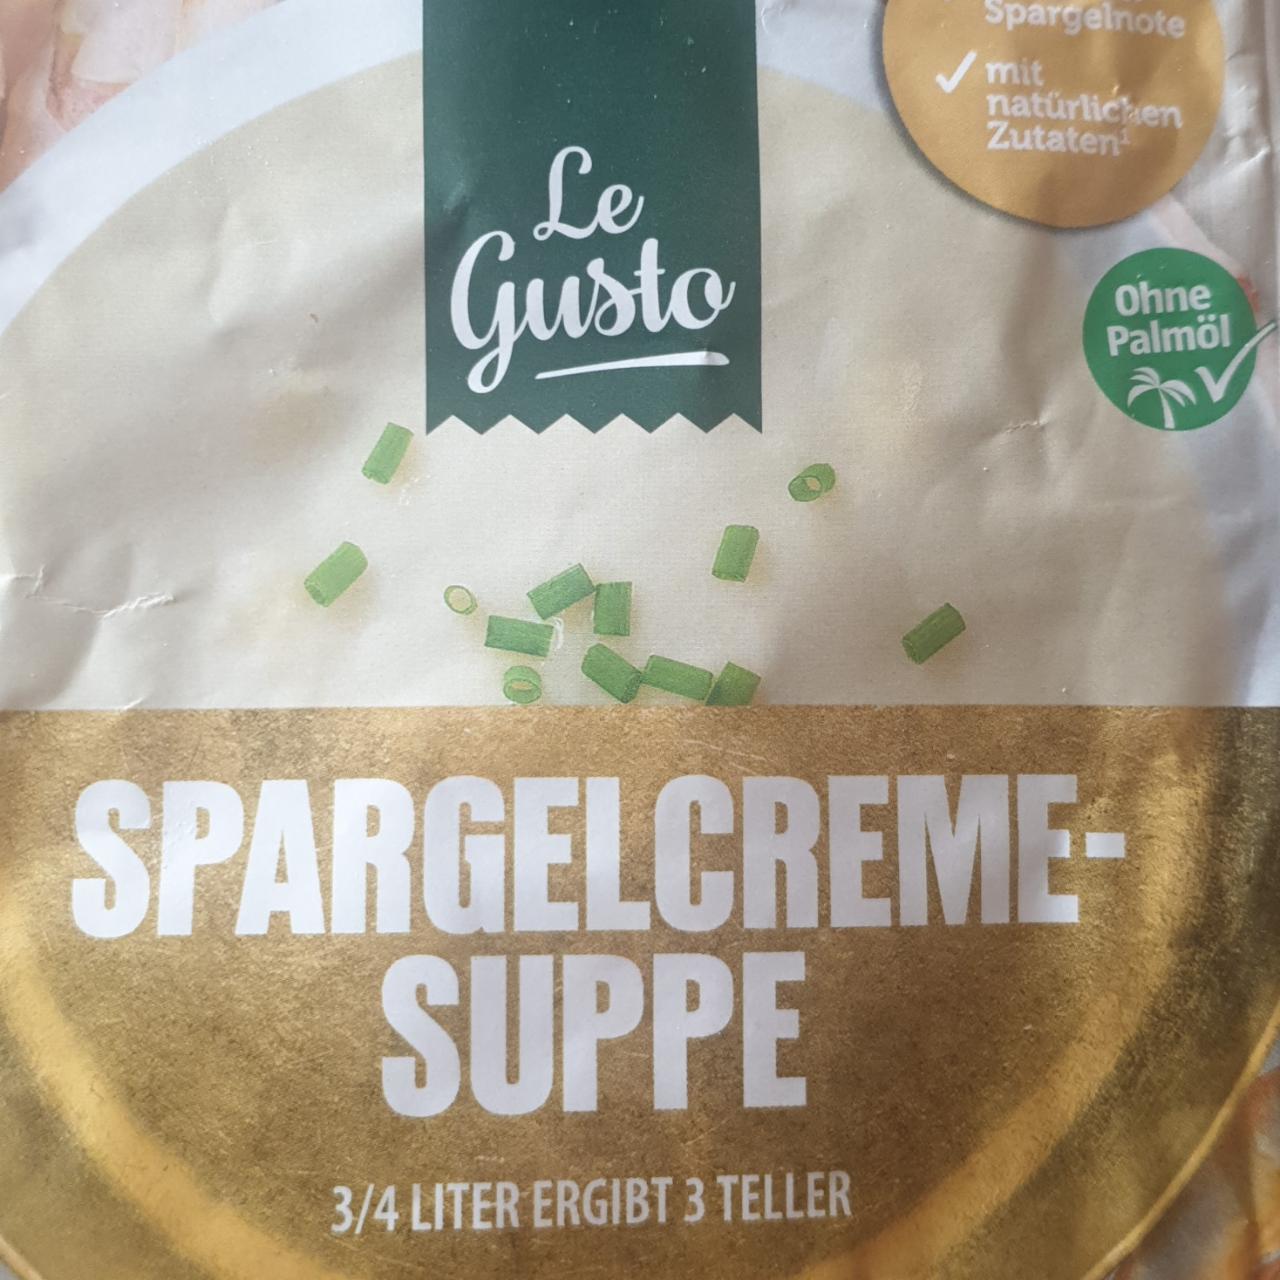 Fotografie - Spargelcreme-suppe Le Gusto